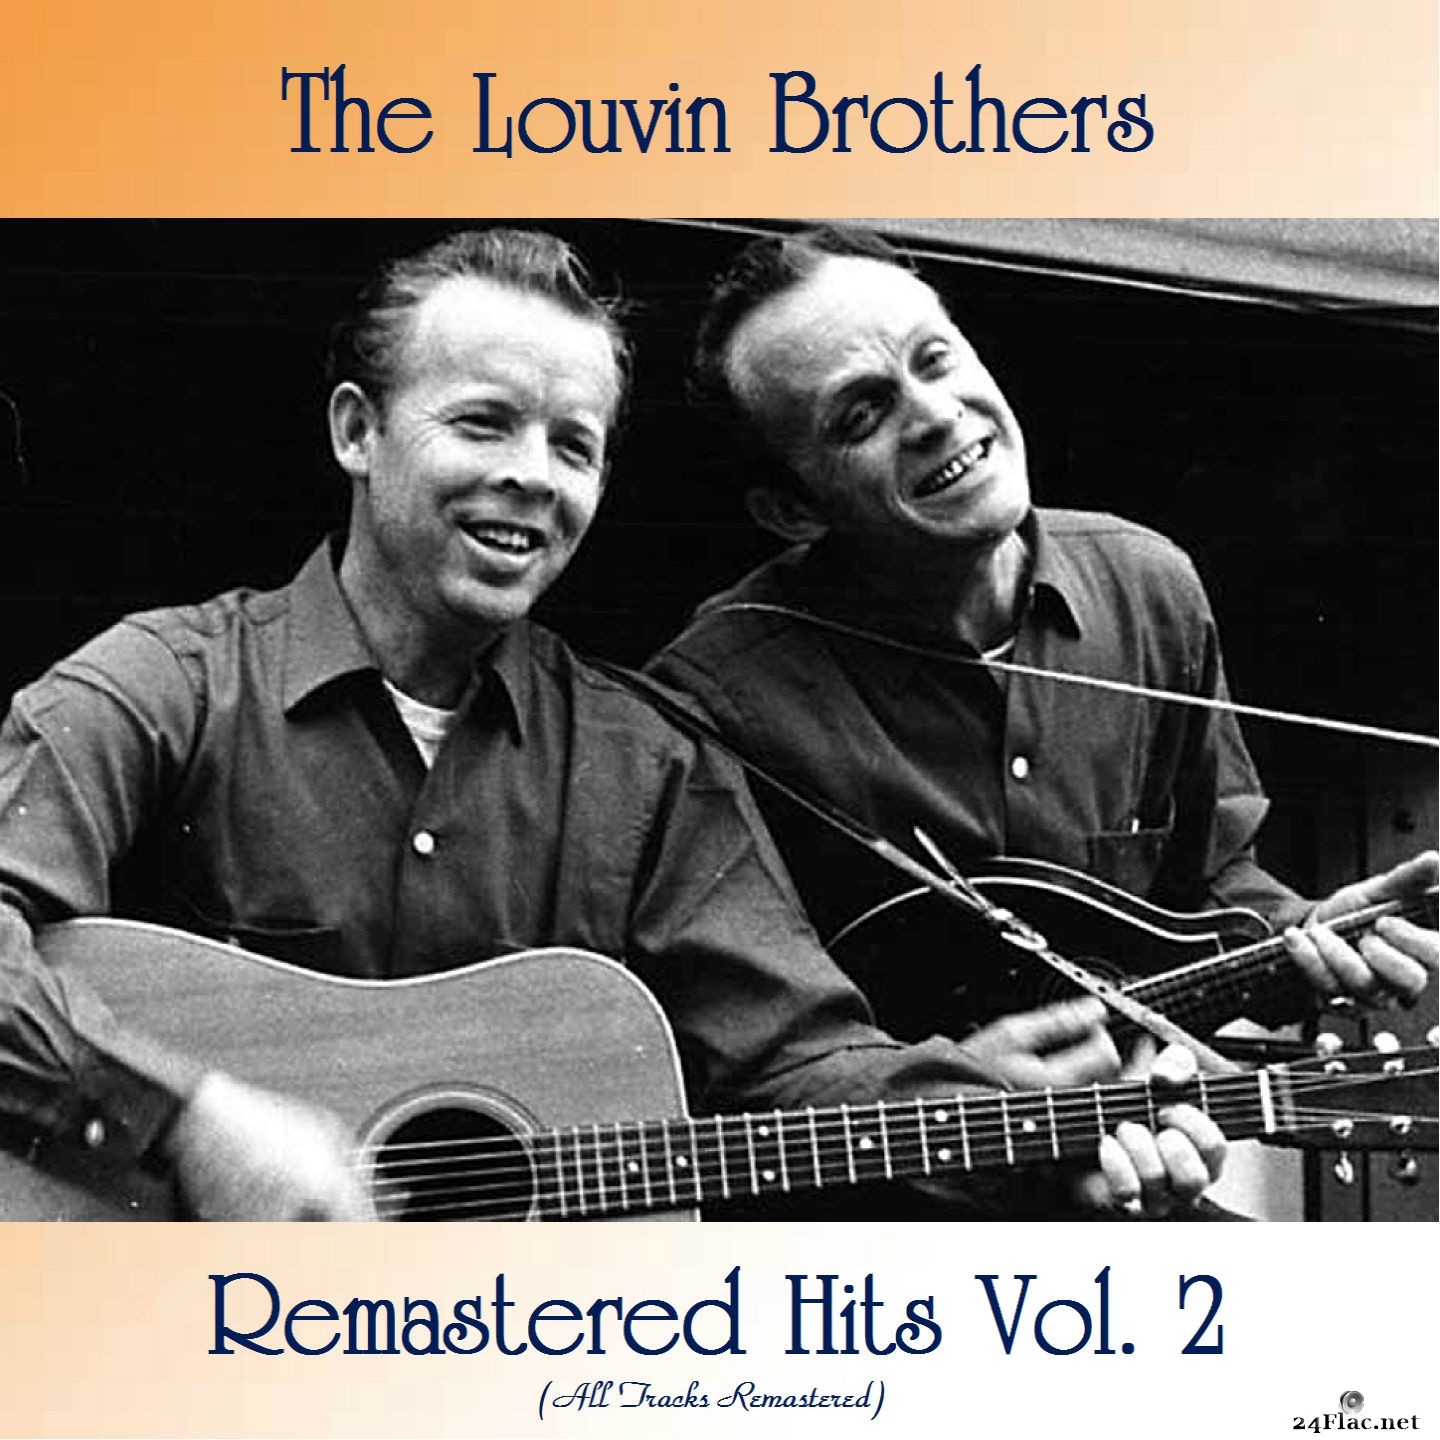 The Louvin Brothers - Remastered Hits Vol. 2 (All Tracks Remastered) (2021) FLAC